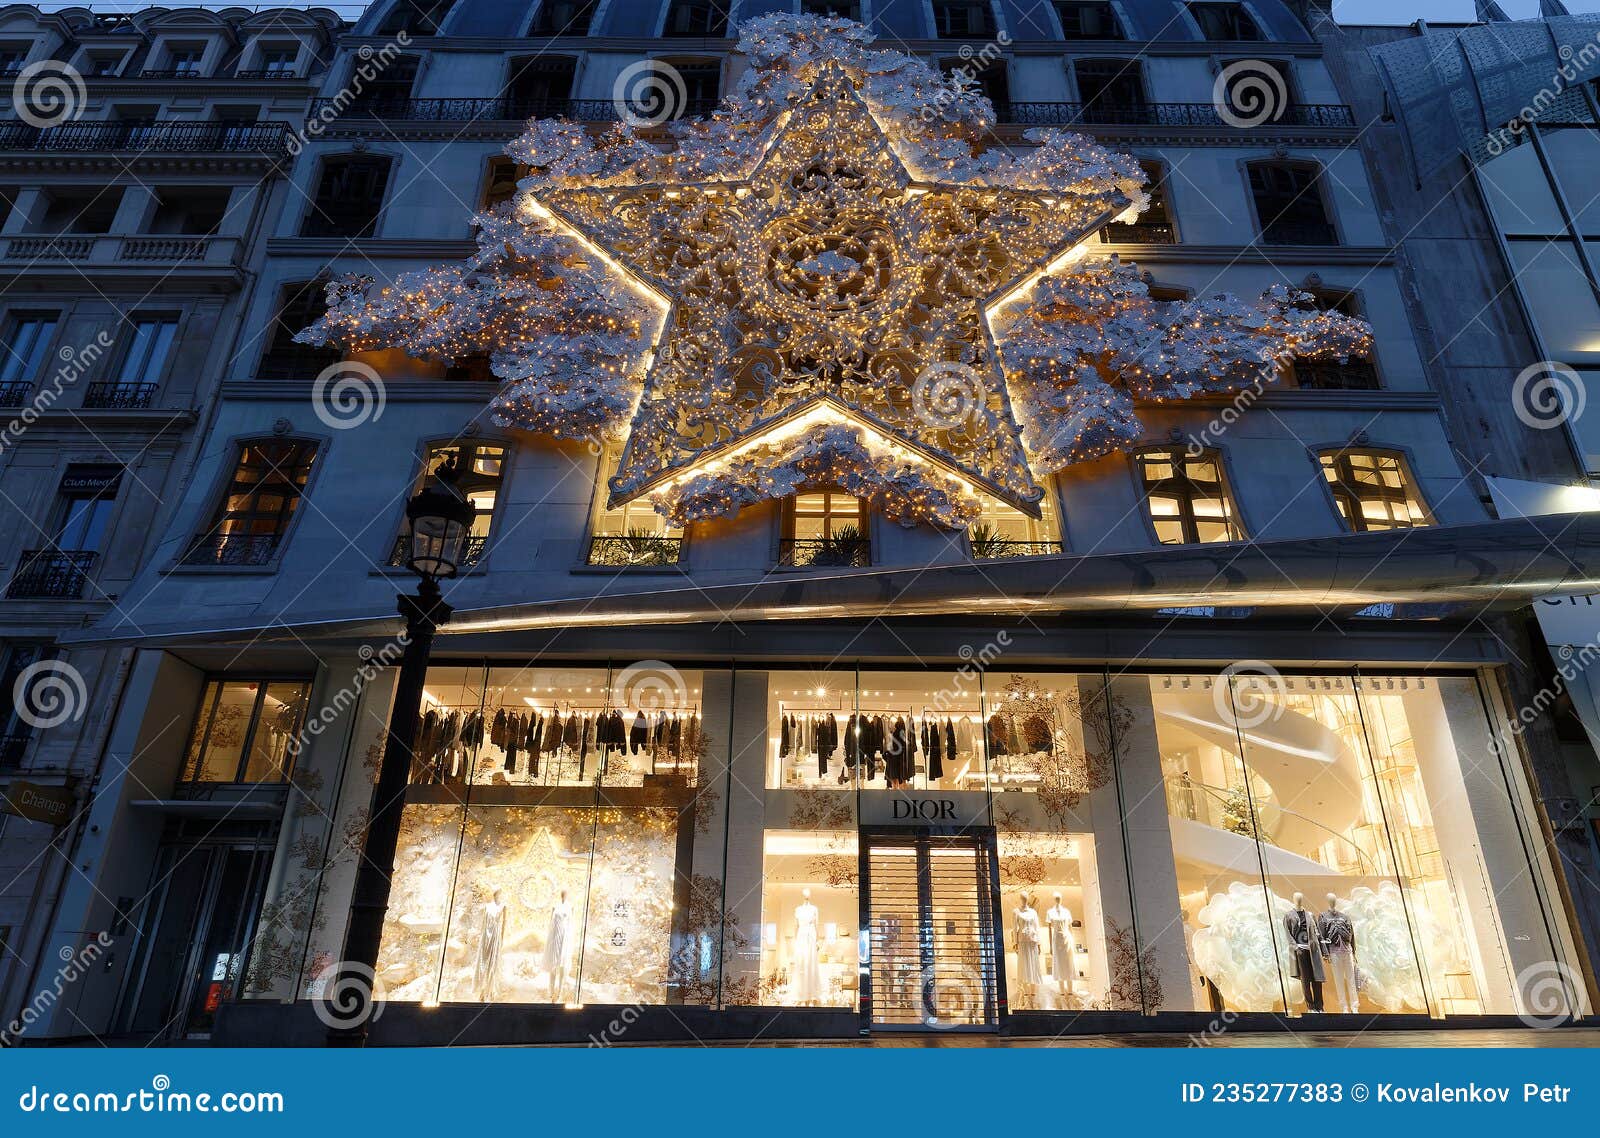 Dior Store at Avenue Des Champs-Elysees Decorated for Christmas in